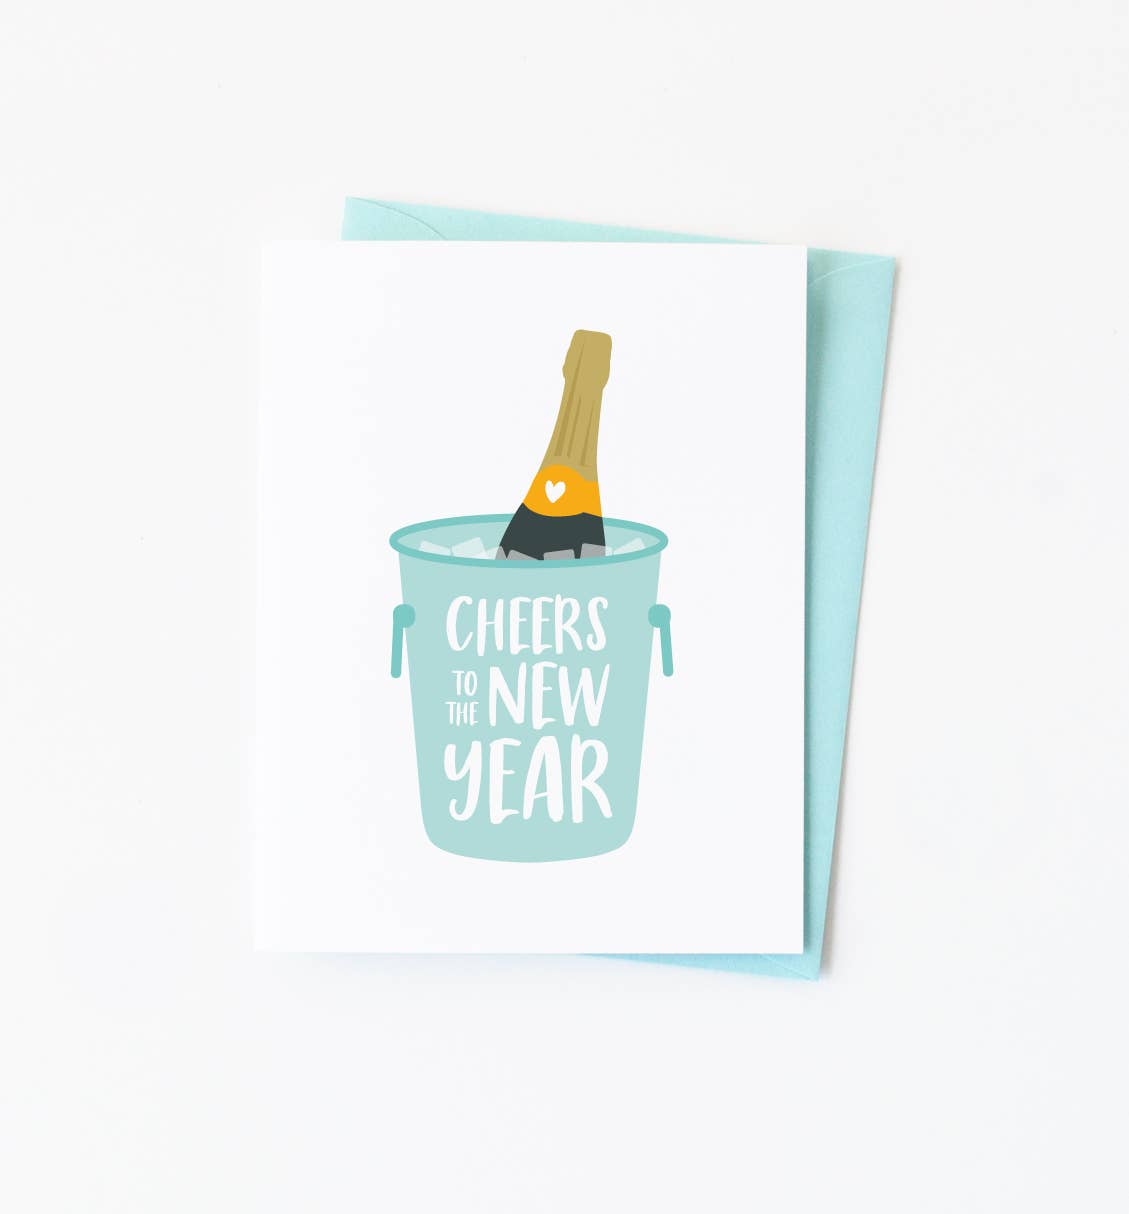 New Year Cheers Greeting Card